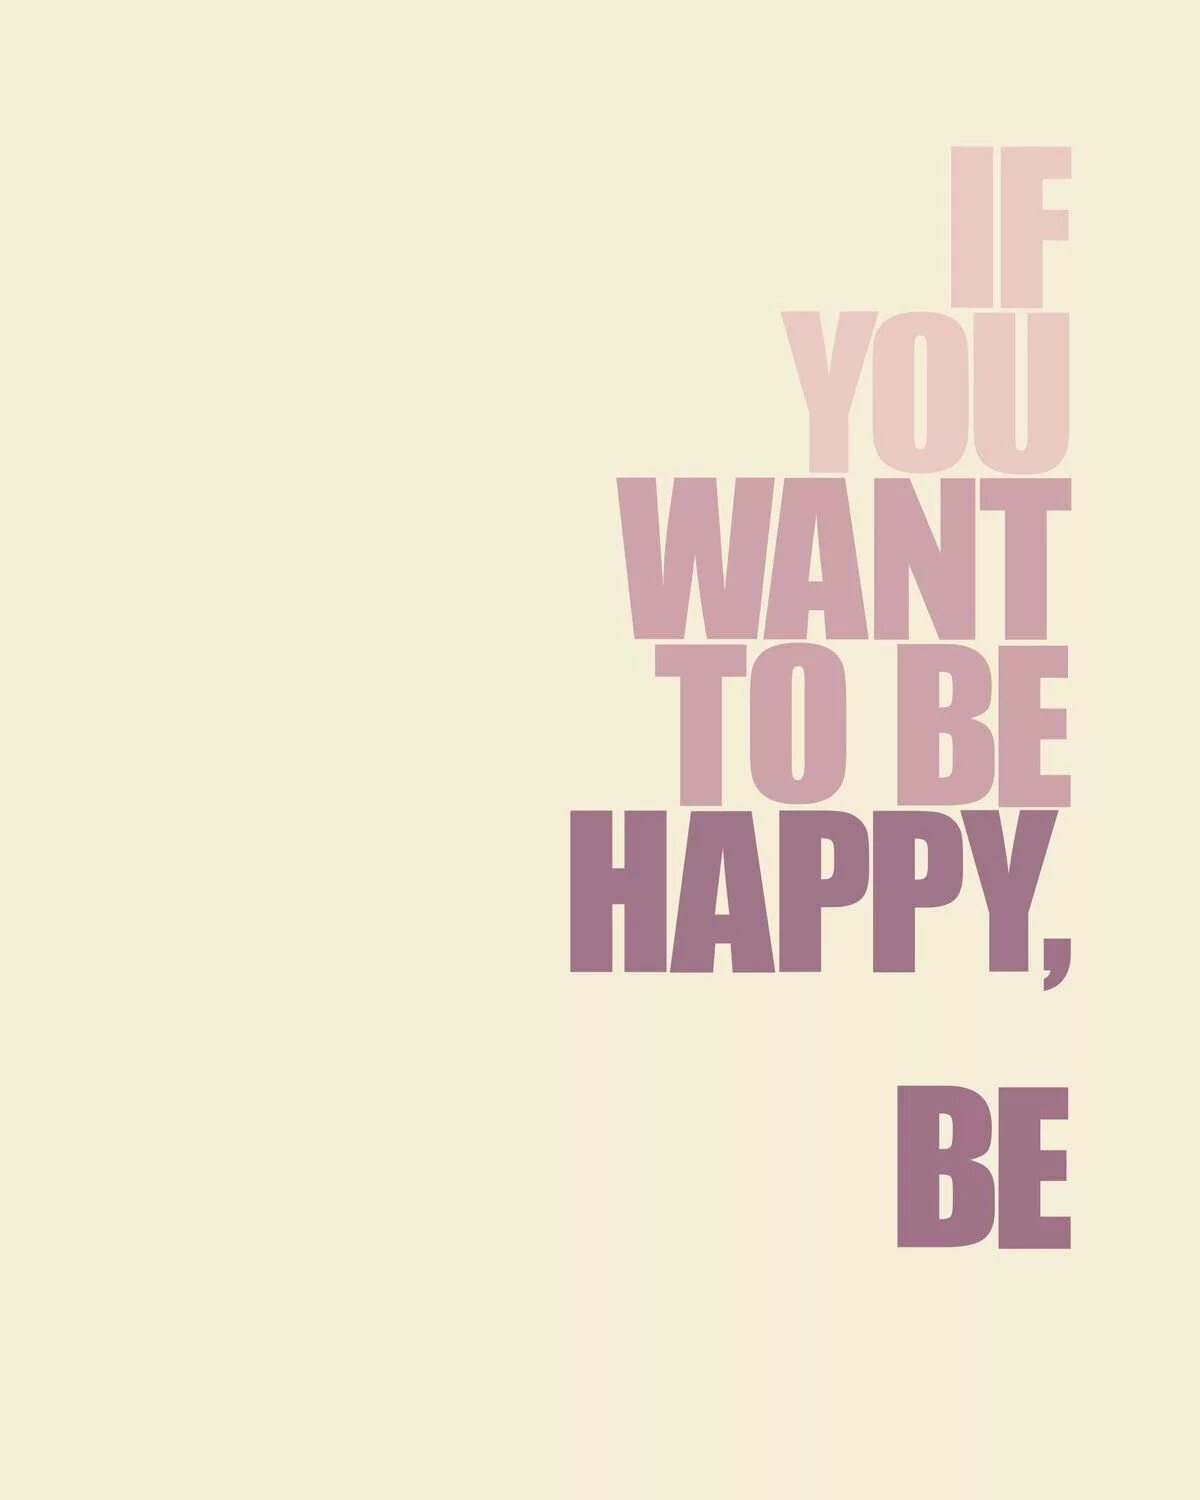 Decide to be happy. If you want to be Happy be. Be Happy. Цитаты be Happy be. I want to be Happy картинки.